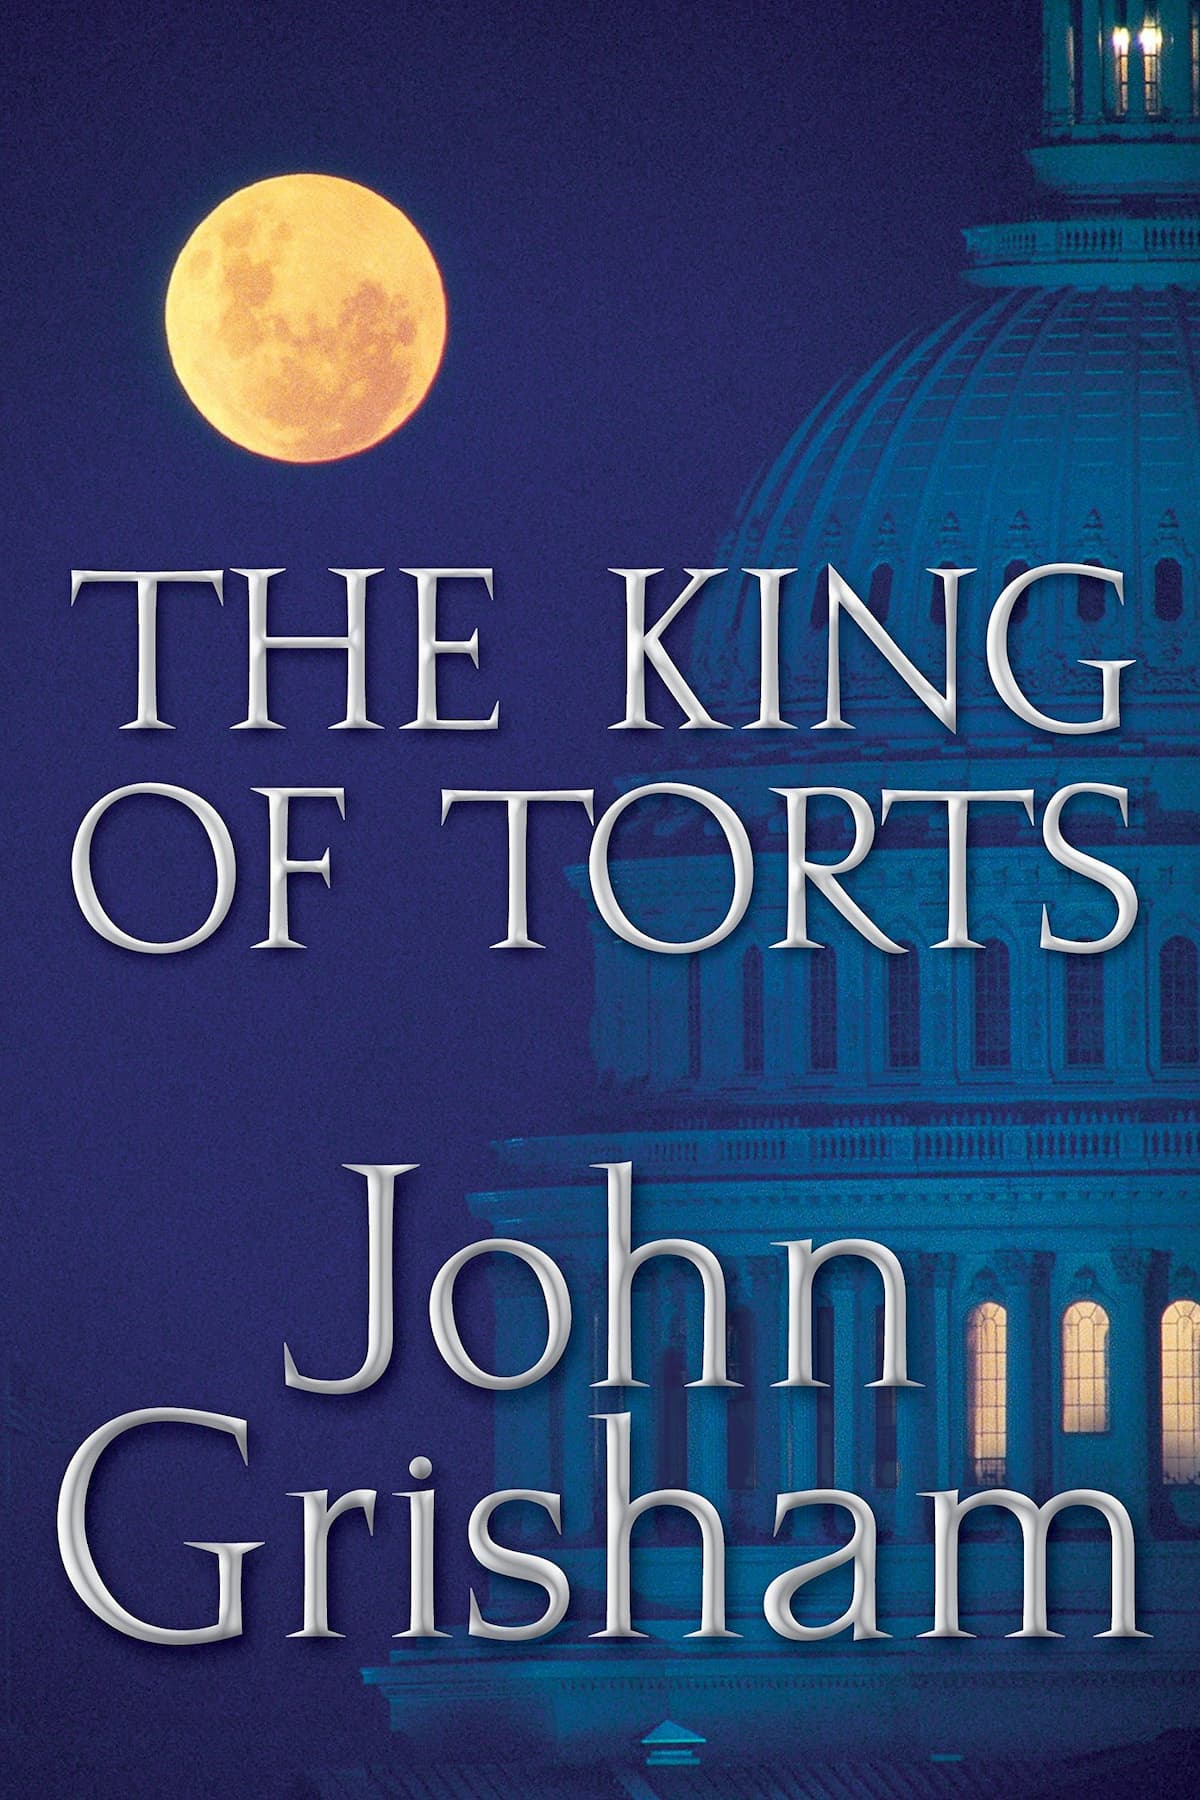 If you’re one who enjoys recharging your energies during the holidays, you’ll find "The King of Torts – John Grisham" very helpful!